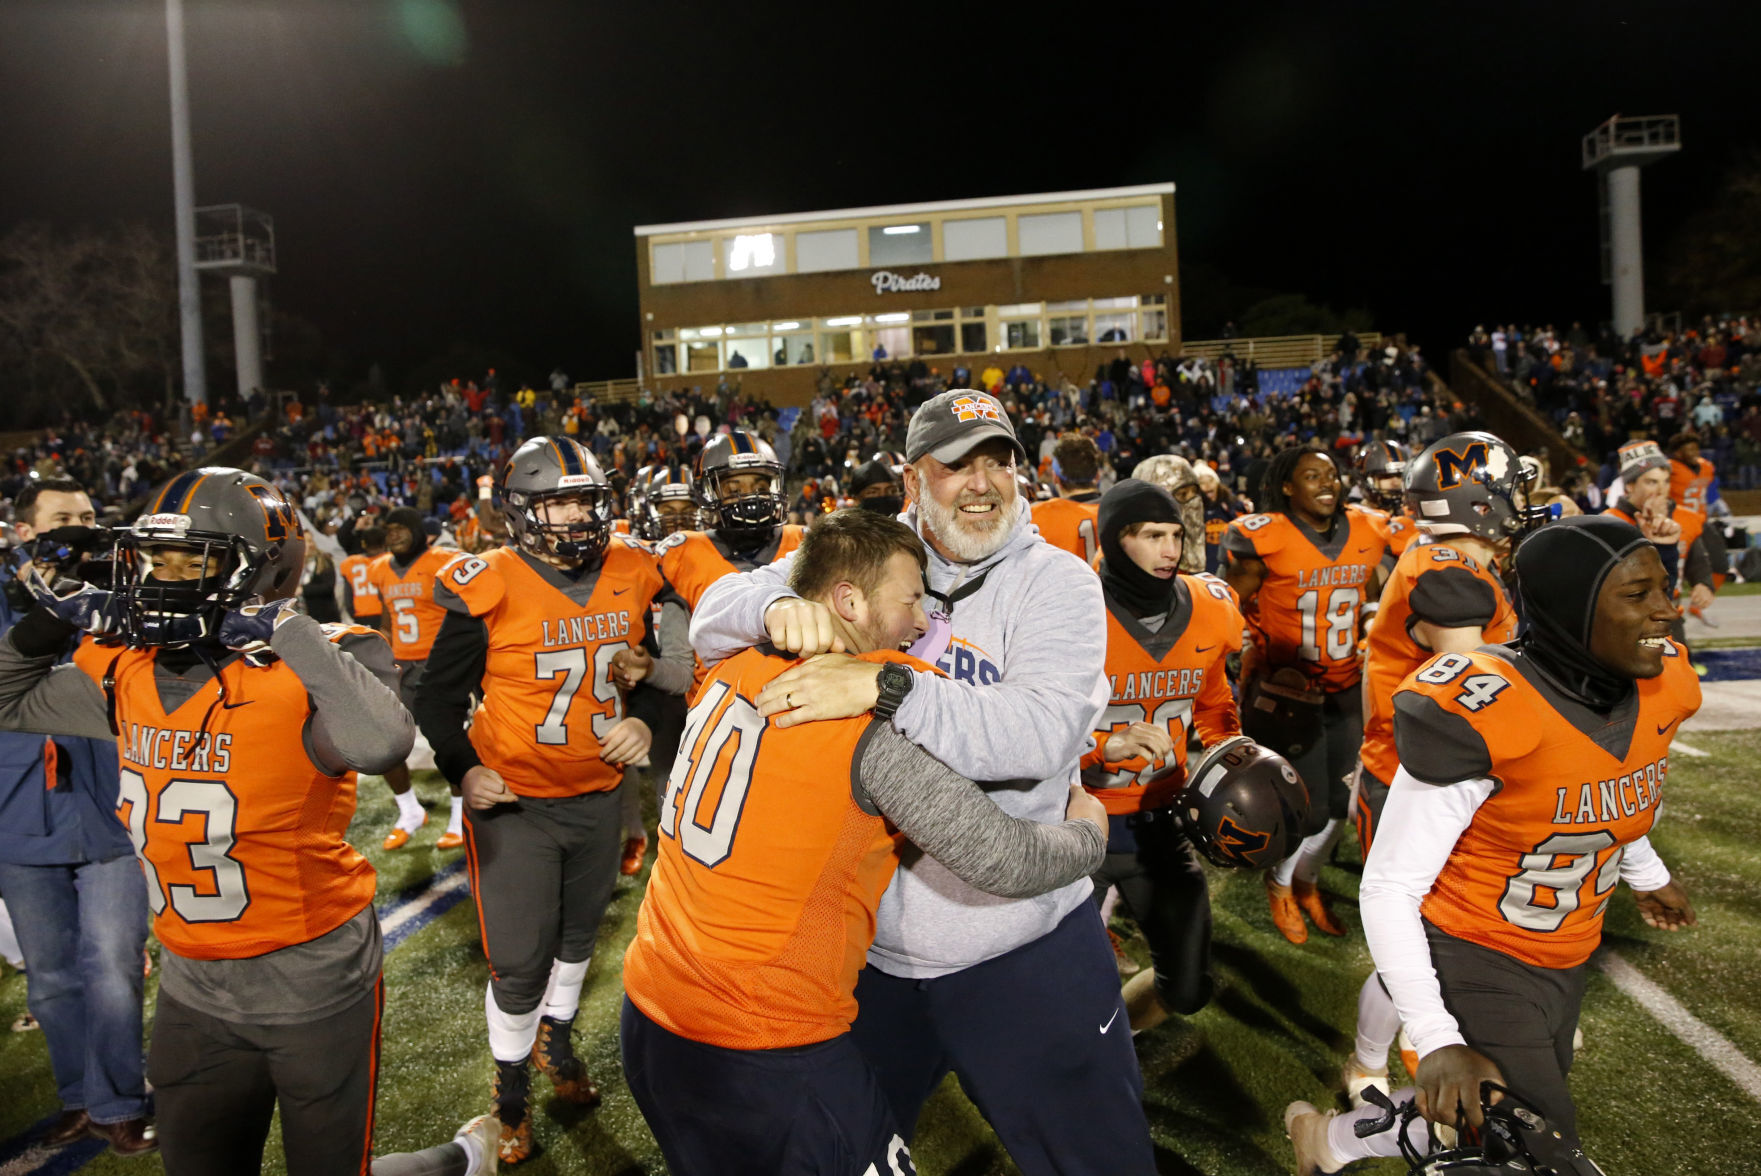 Longtime Manchester High Football Coach Tom Hall Steps Down After 25 Years, Leaves Legacy of State Championship Win